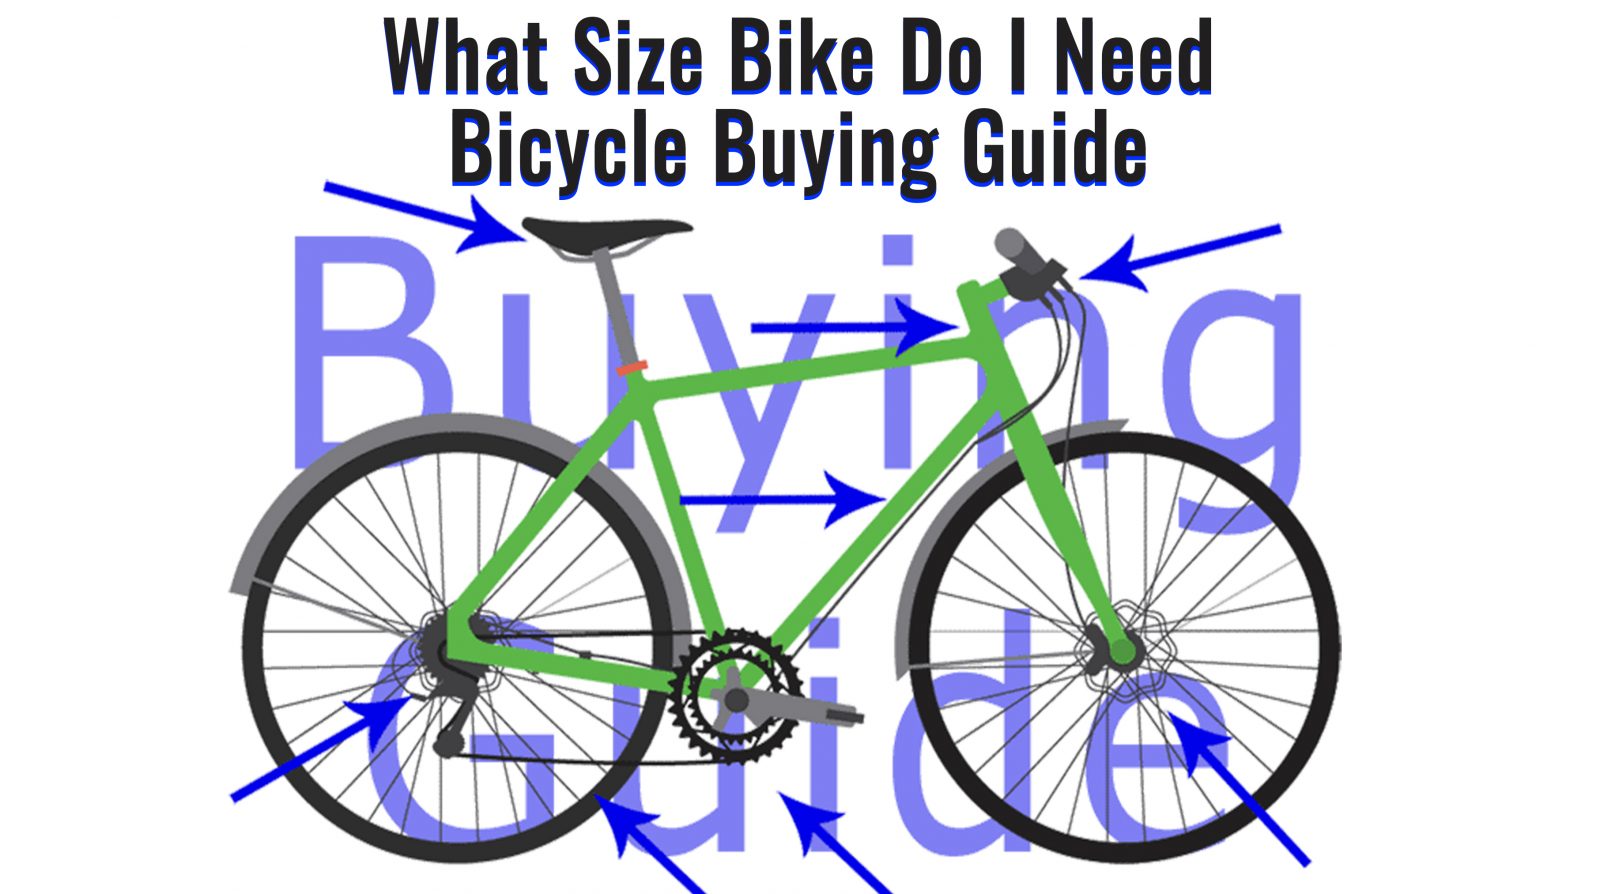 What Size Bike Do I Need: Bicycle Buying Guide - What Size Bike Do I NeeD Bicycle Buying GuiDe 1600x894